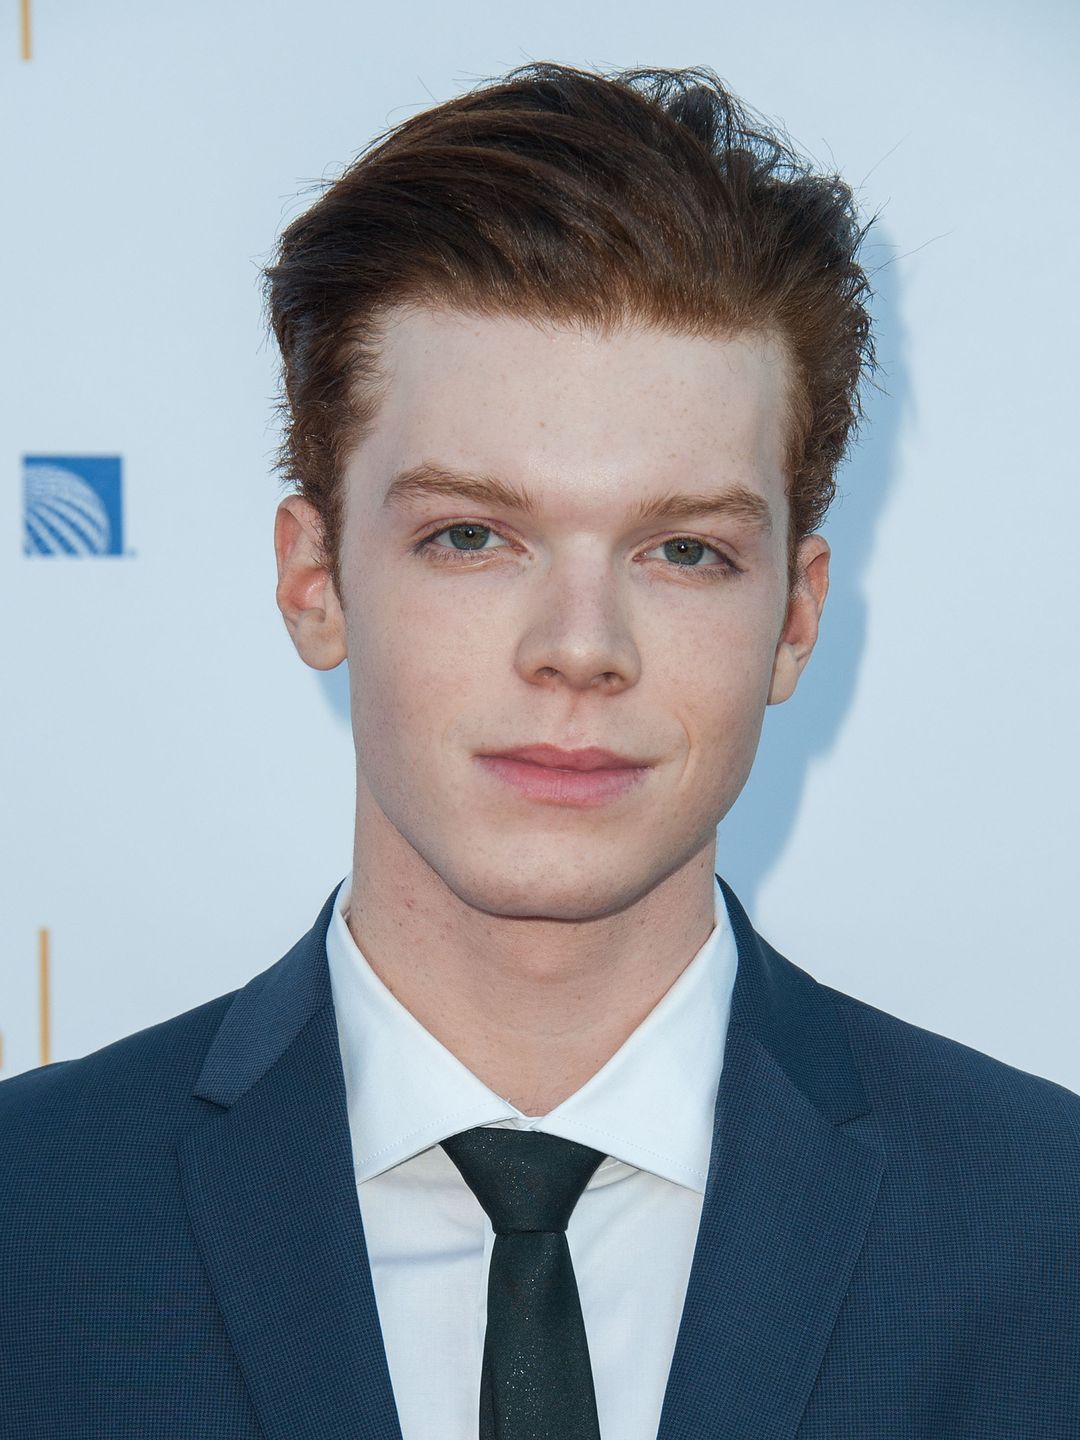 Cameron Monaghan does he have kids